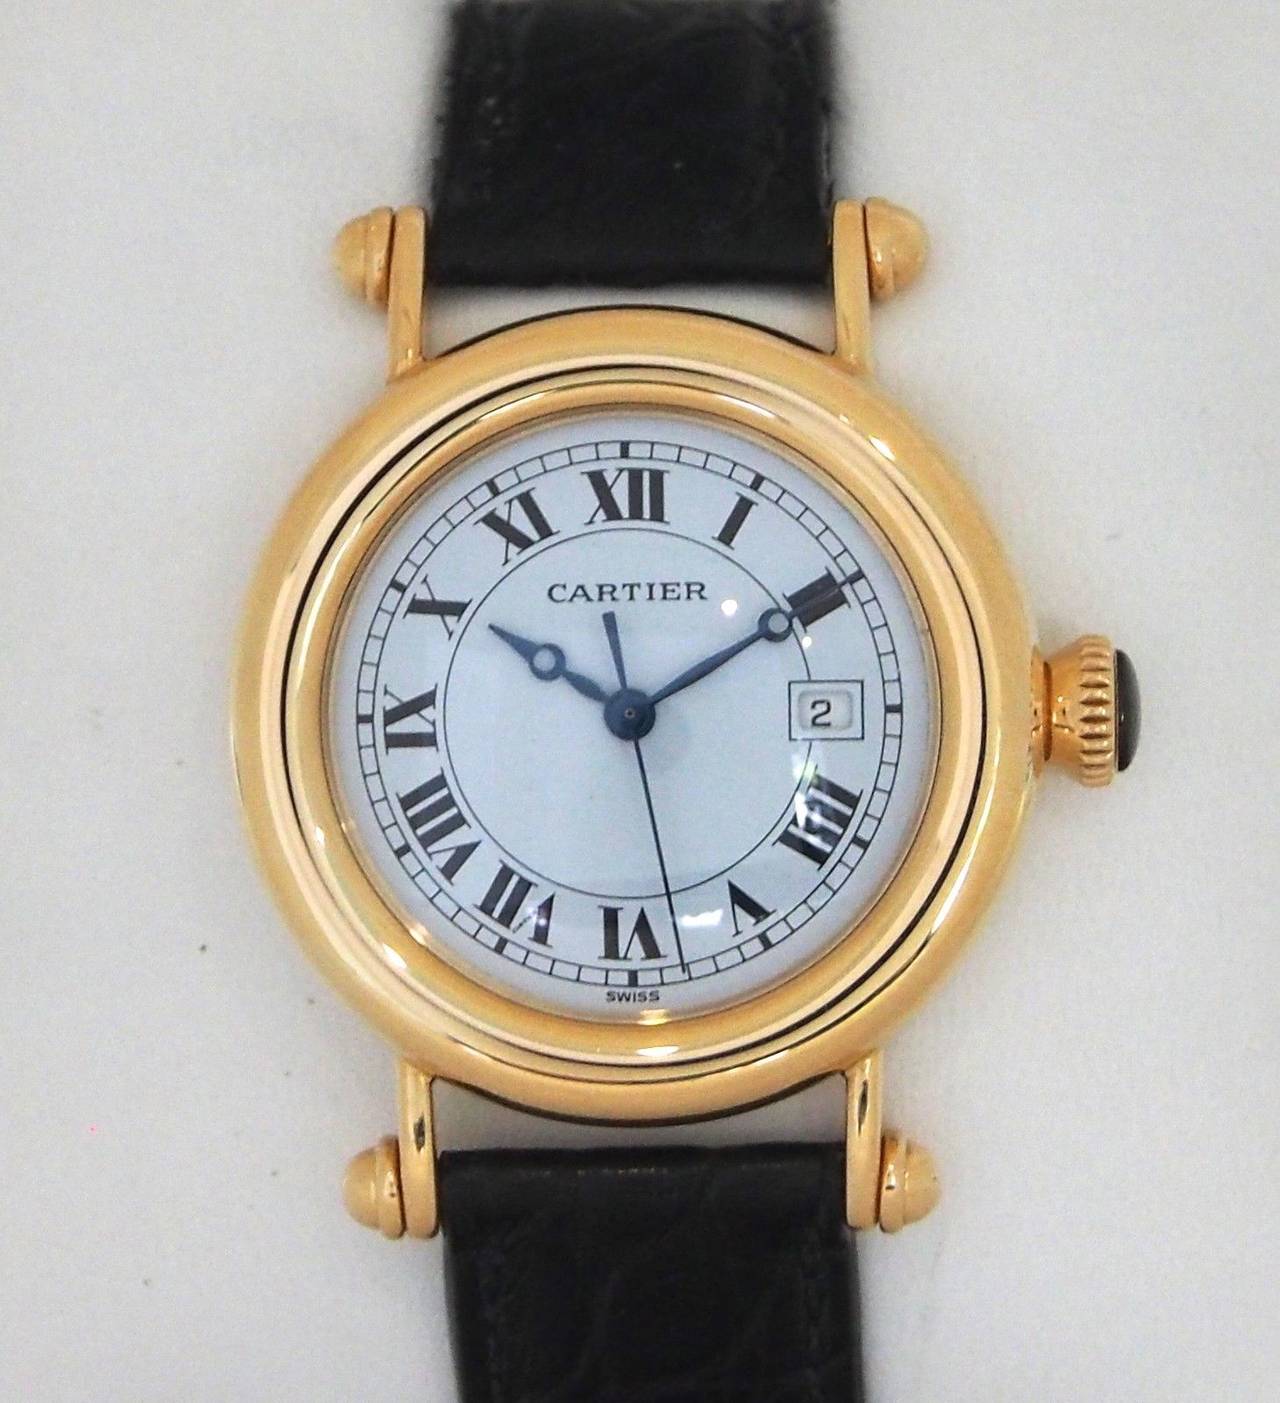 Brand Name  Cartier  
Style Number  Ref. 1420  
Also Called  Diabolo  
Series  Diablo  
Gender  Lady's  
Case Material  18K Yellow Gold   
Dial Color  White  
Movement  Quartz  
Functions  Hours, Minutes  
Crystal Material  Sapphire  
Case